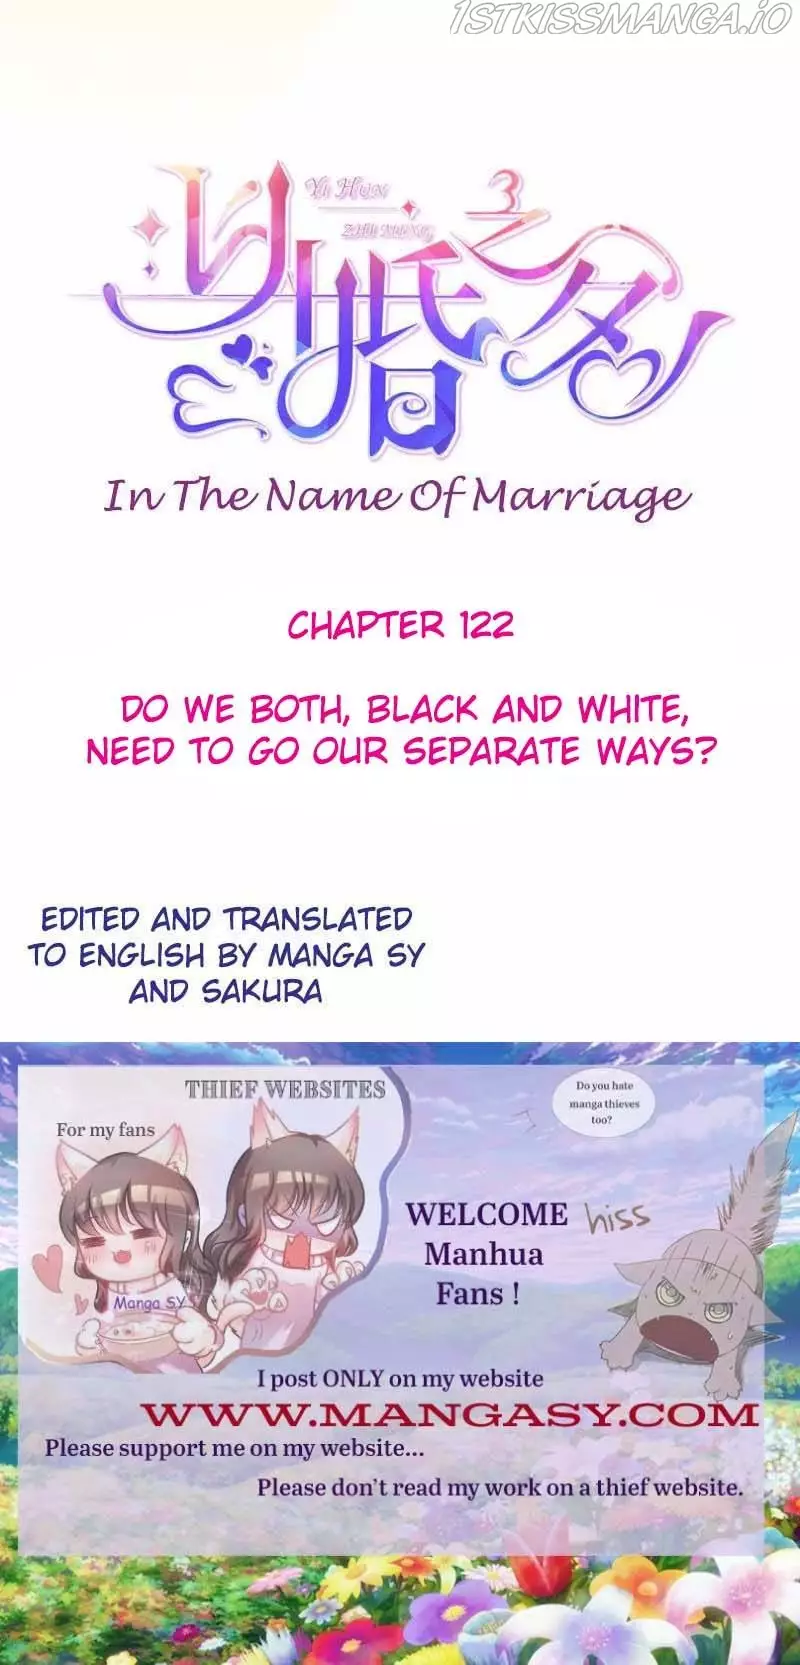 In The Name Of Marriage - 122 page 1-d42ecbdd